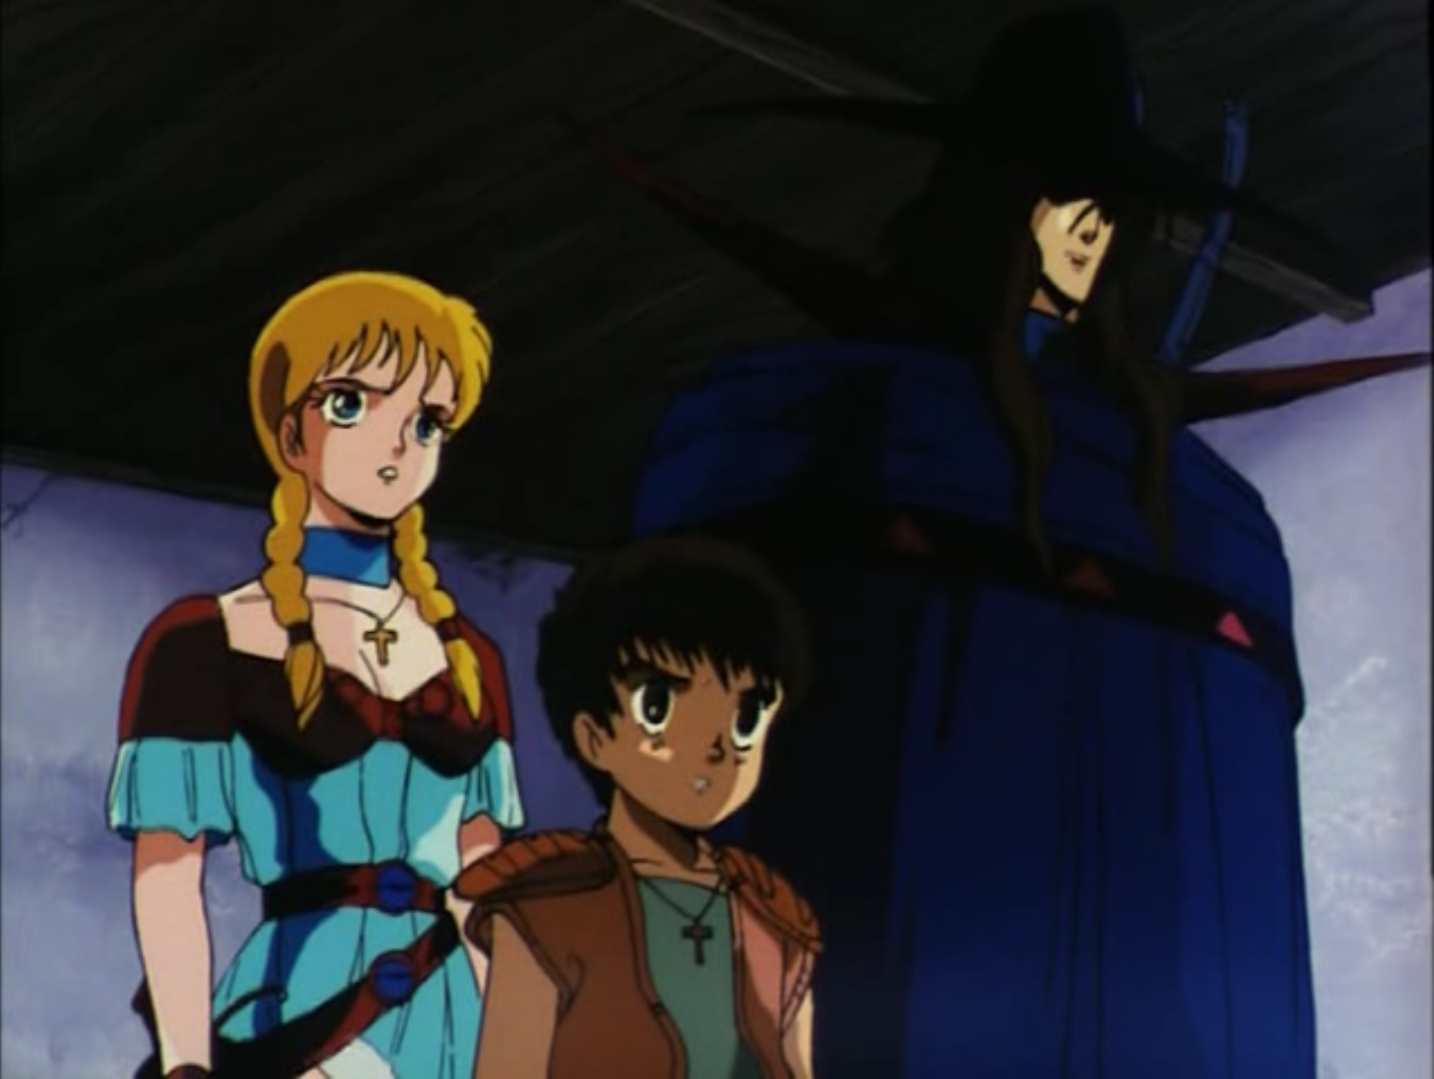 ANIME: Vampire Hunter D (1985), Dungeons and Dragons meets